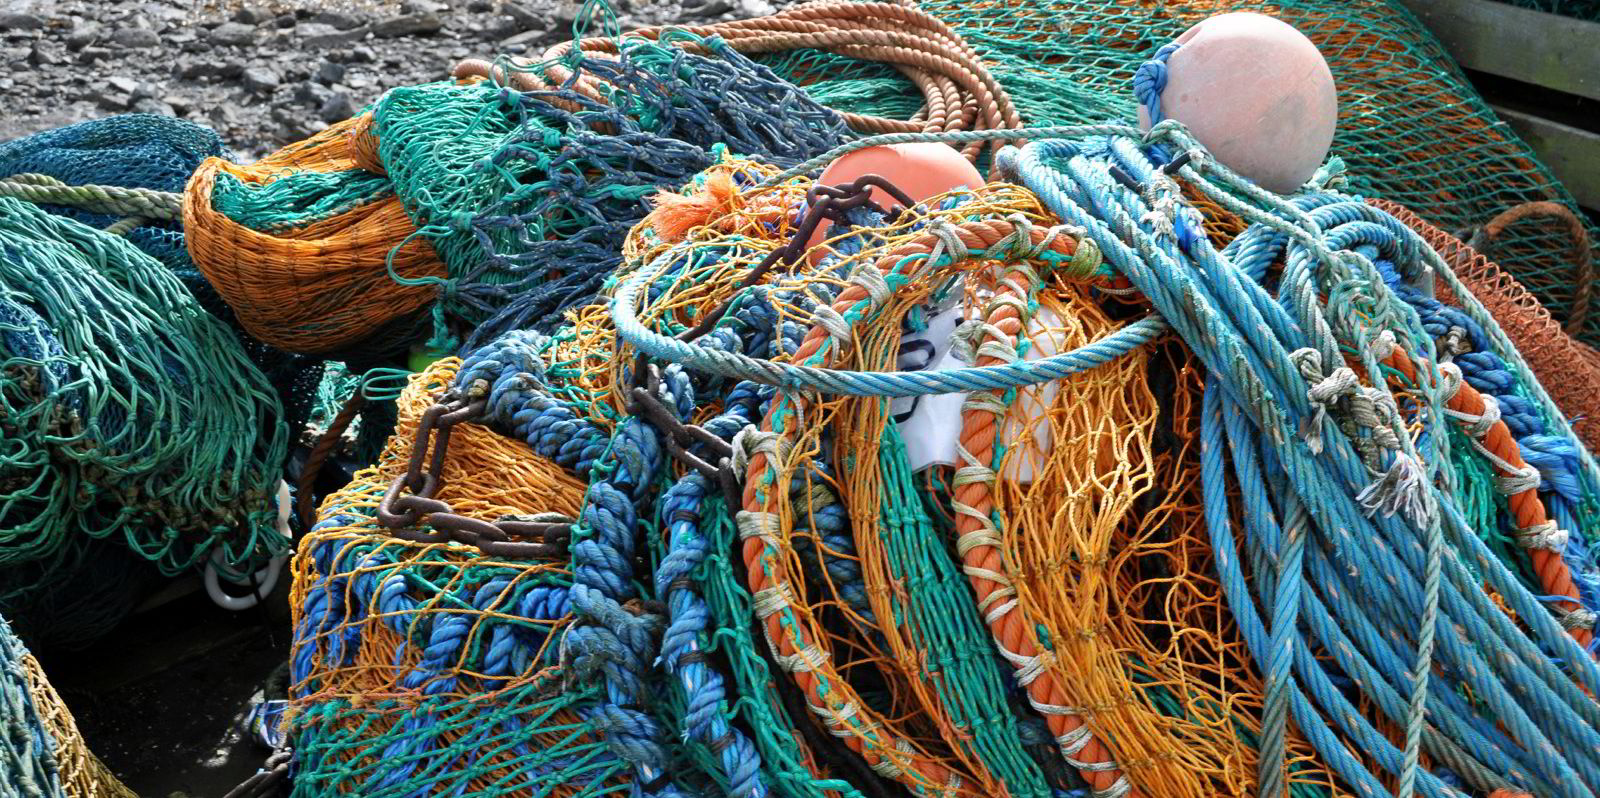 Cyprus Sea Lines says fishing net was catalyst for Aussie bulker